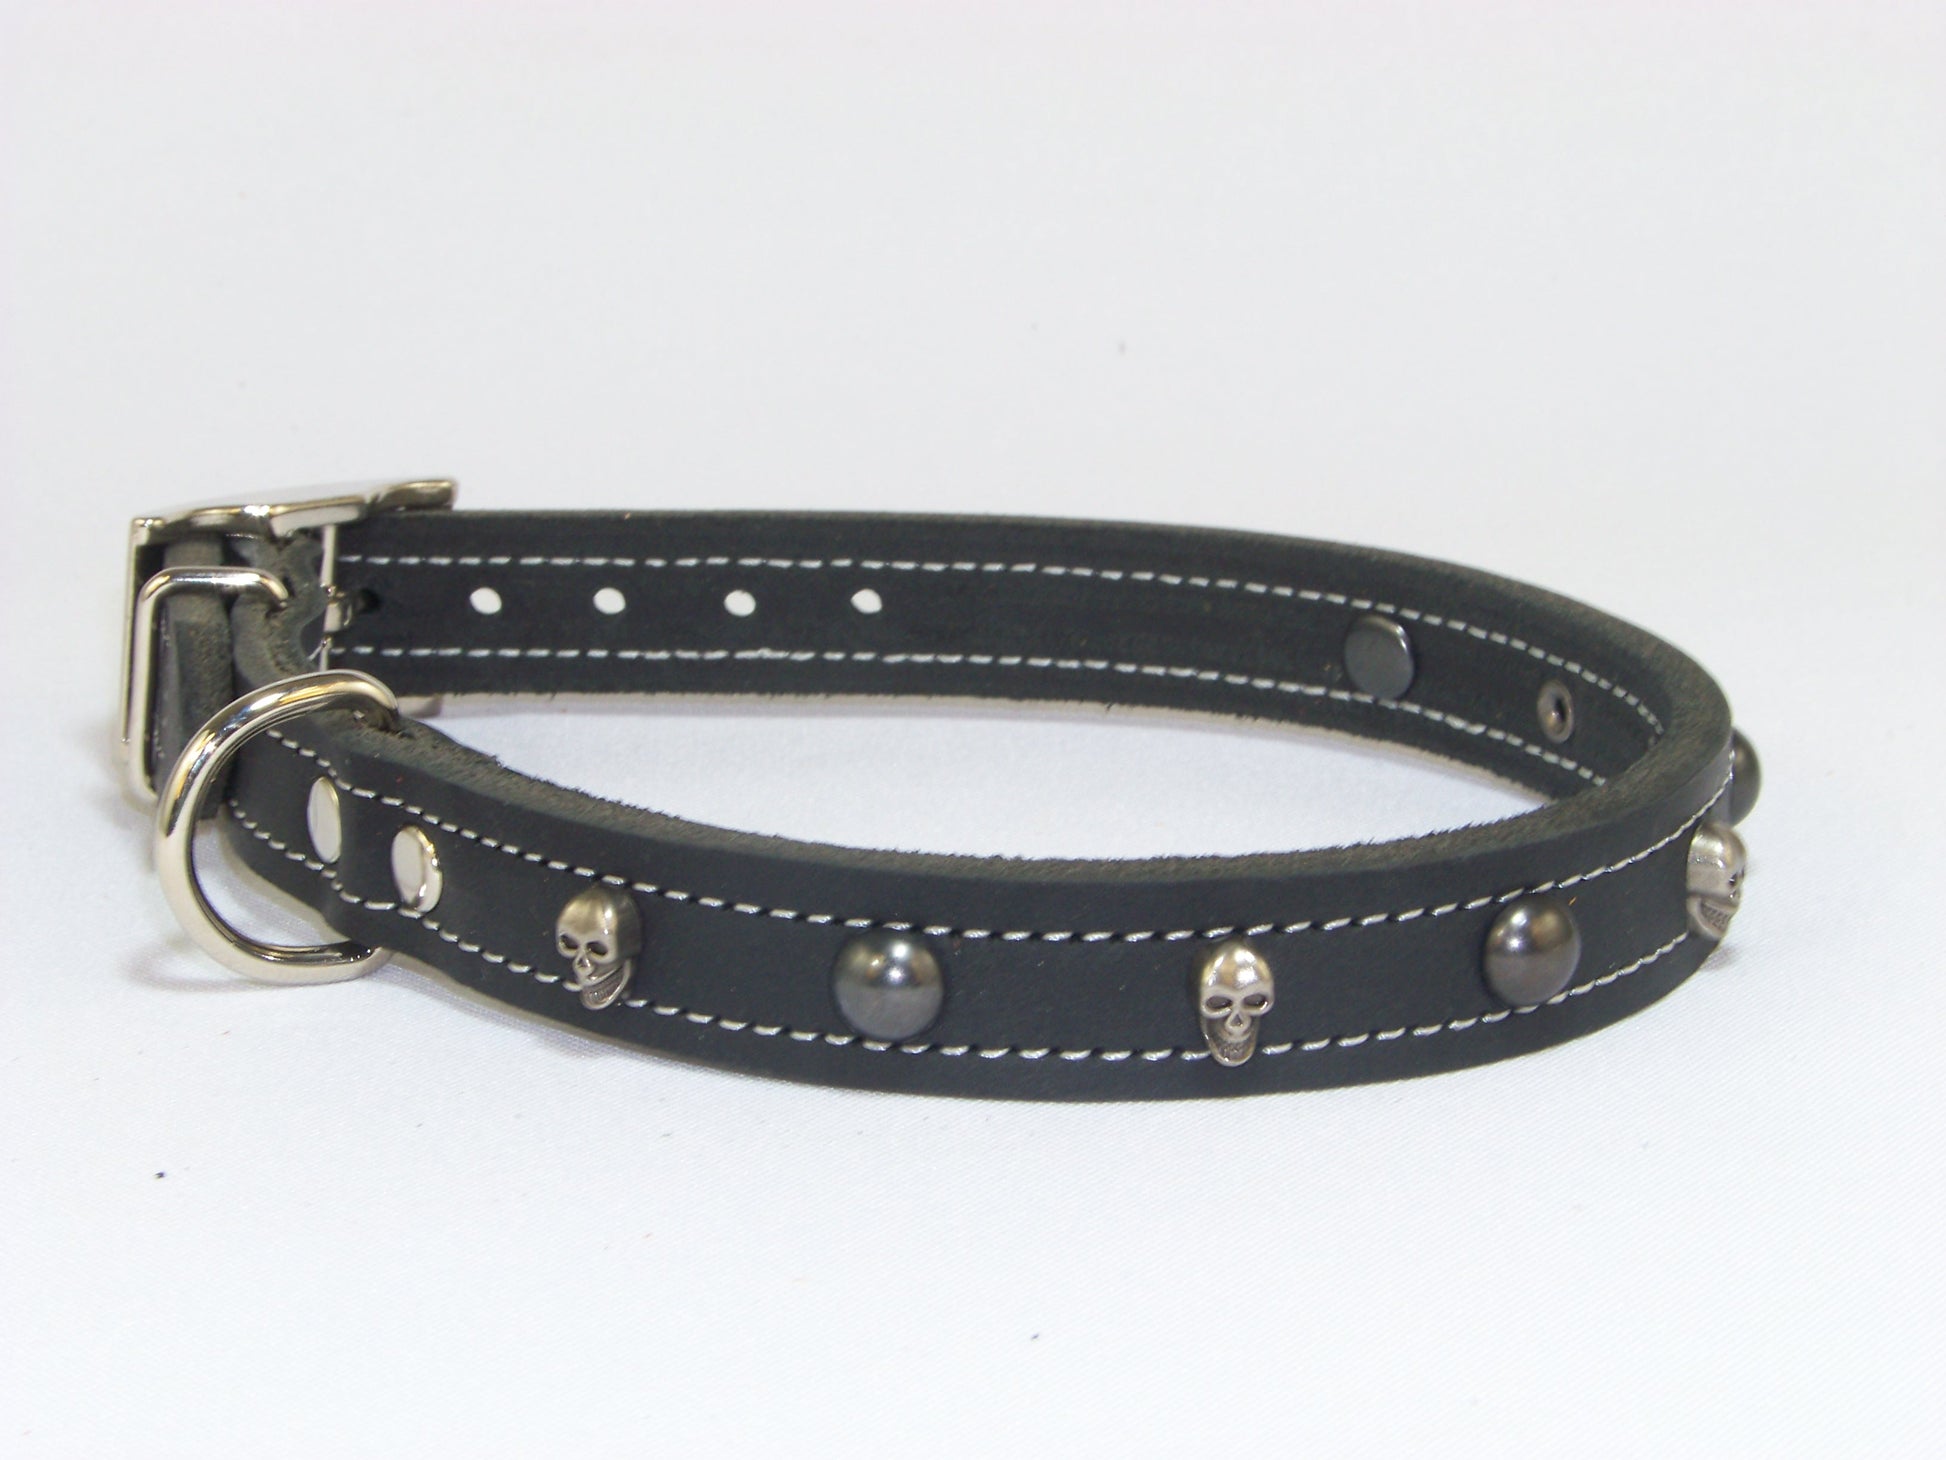 Angel Leather Spiked Dog Collar Amsterdam - Chocolate Brown